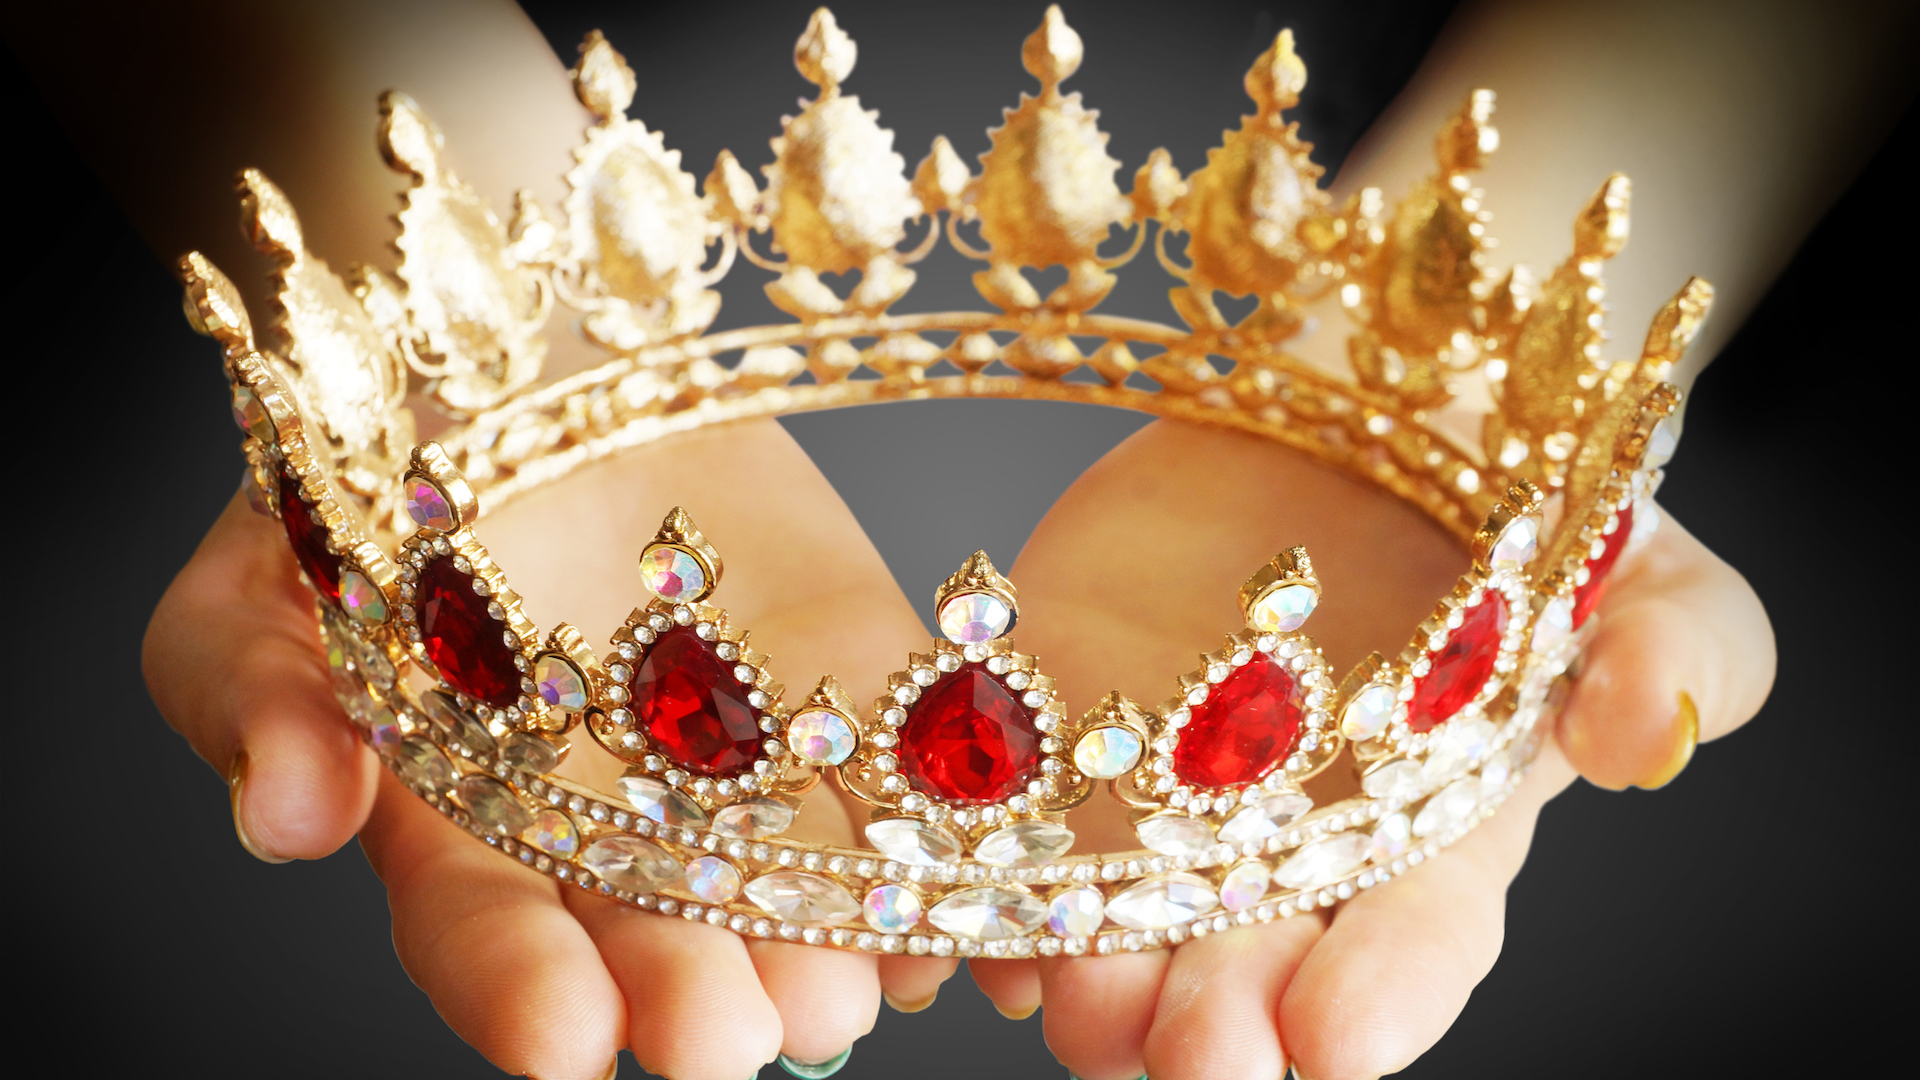 A sparkling crown covered in jewels